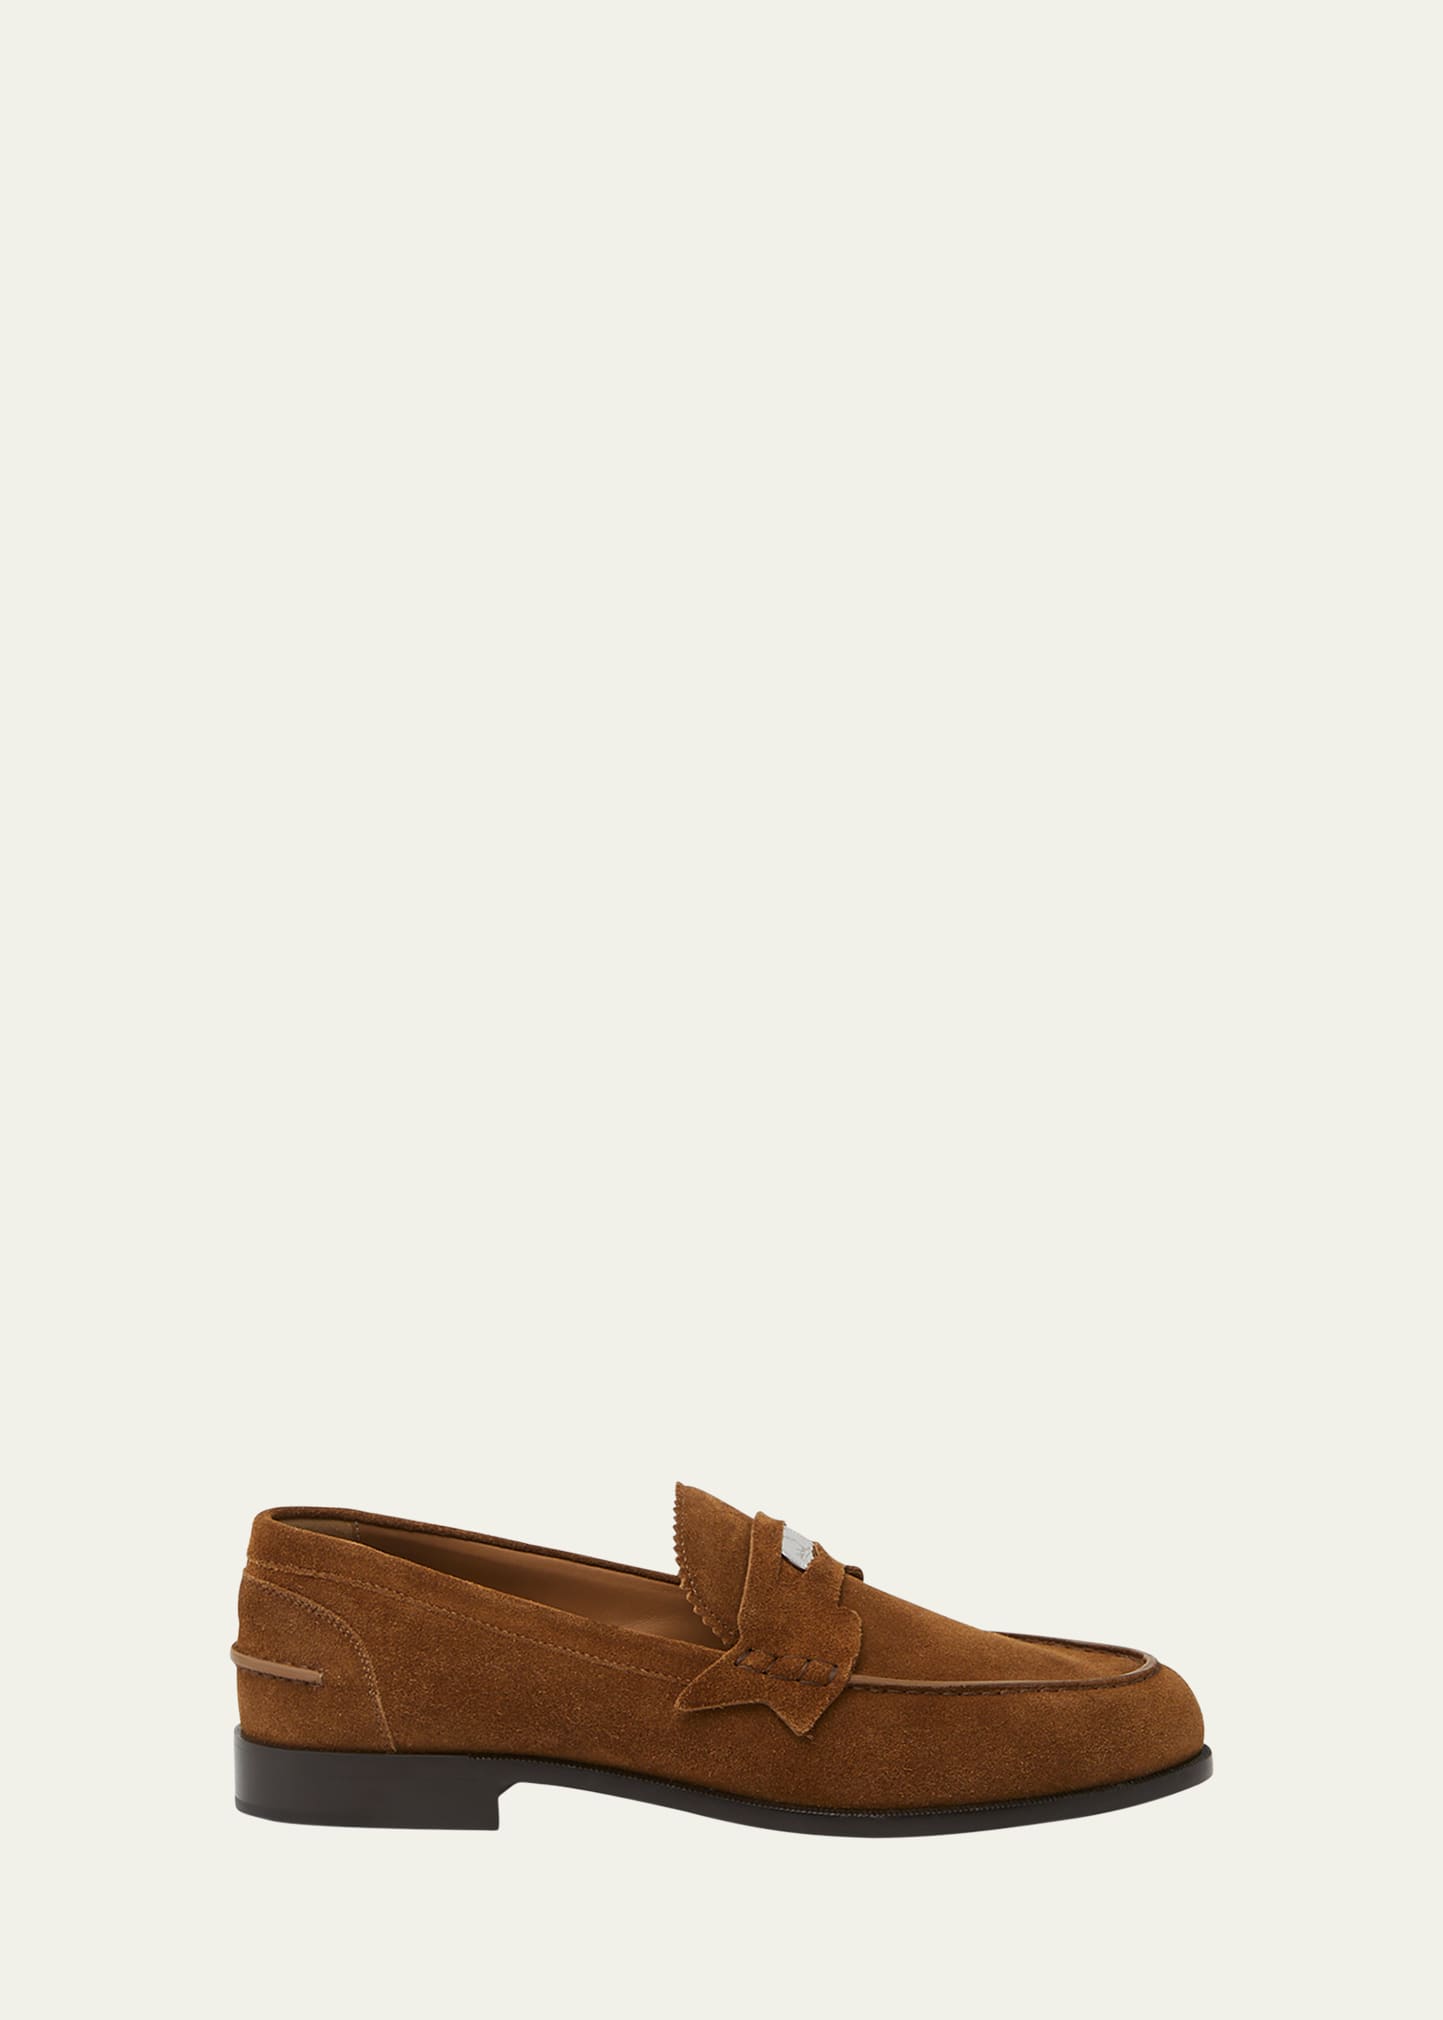 Christian Louboutin Men's Penny Leather Penny Loafers In Brown